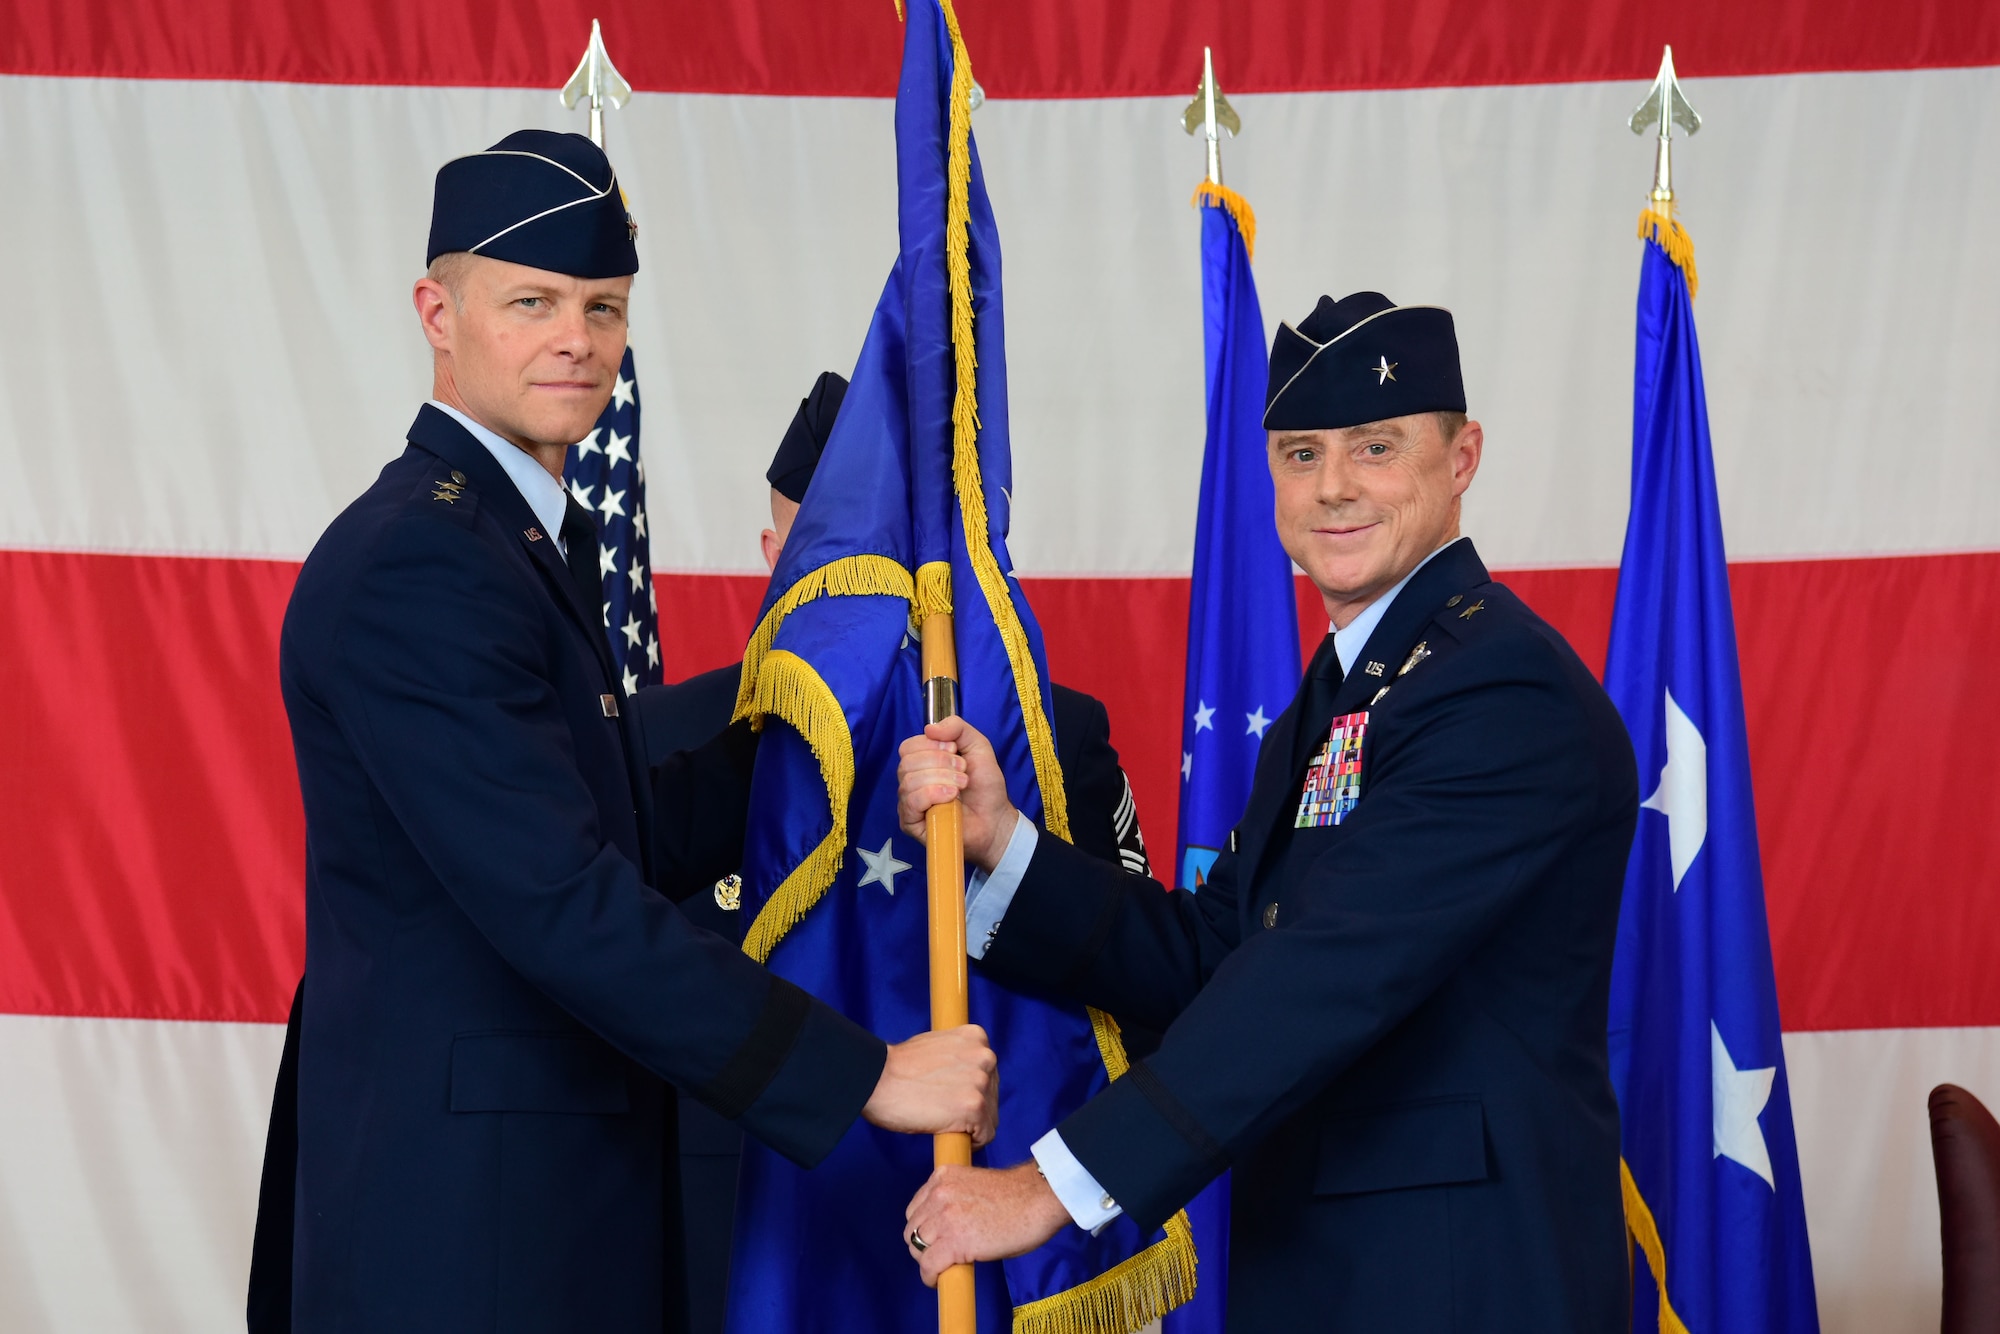 U.S. Air Force Brig. Gen. Tad D. Clark, 31st Fighter Wing incoming commander, right, assumes command from Maj. Gen. Derek C. France, 3rd Air Force commander, left, during a change of command at Aviano Air Base